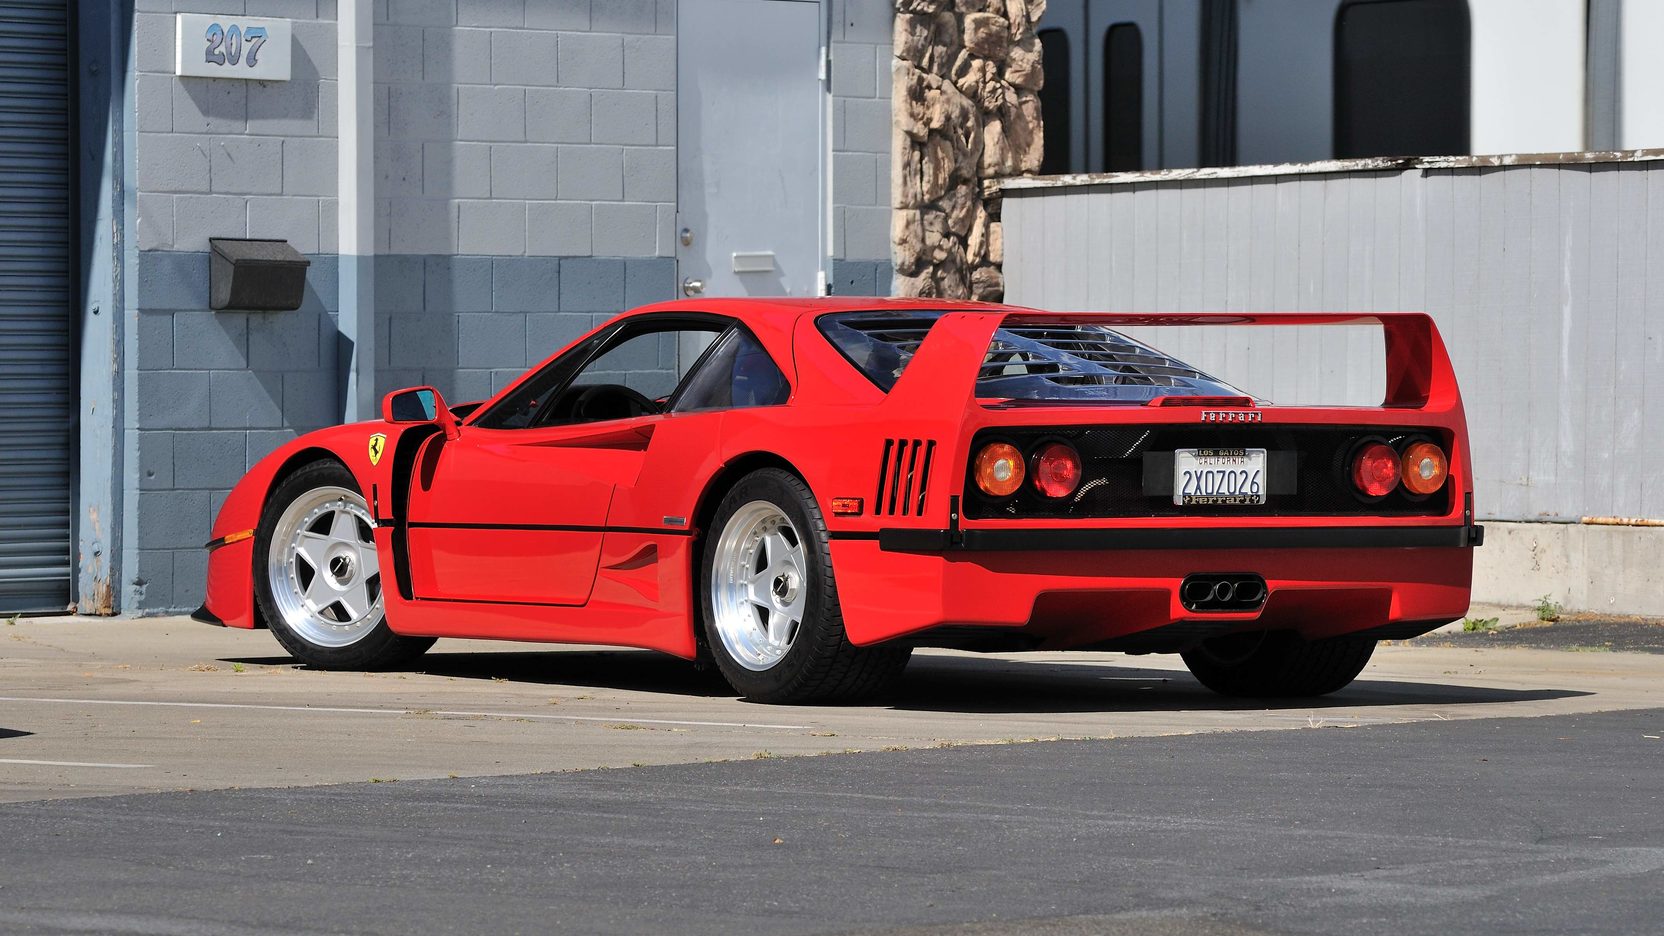 Red Ferrari F40 sitting in parking lot behind building